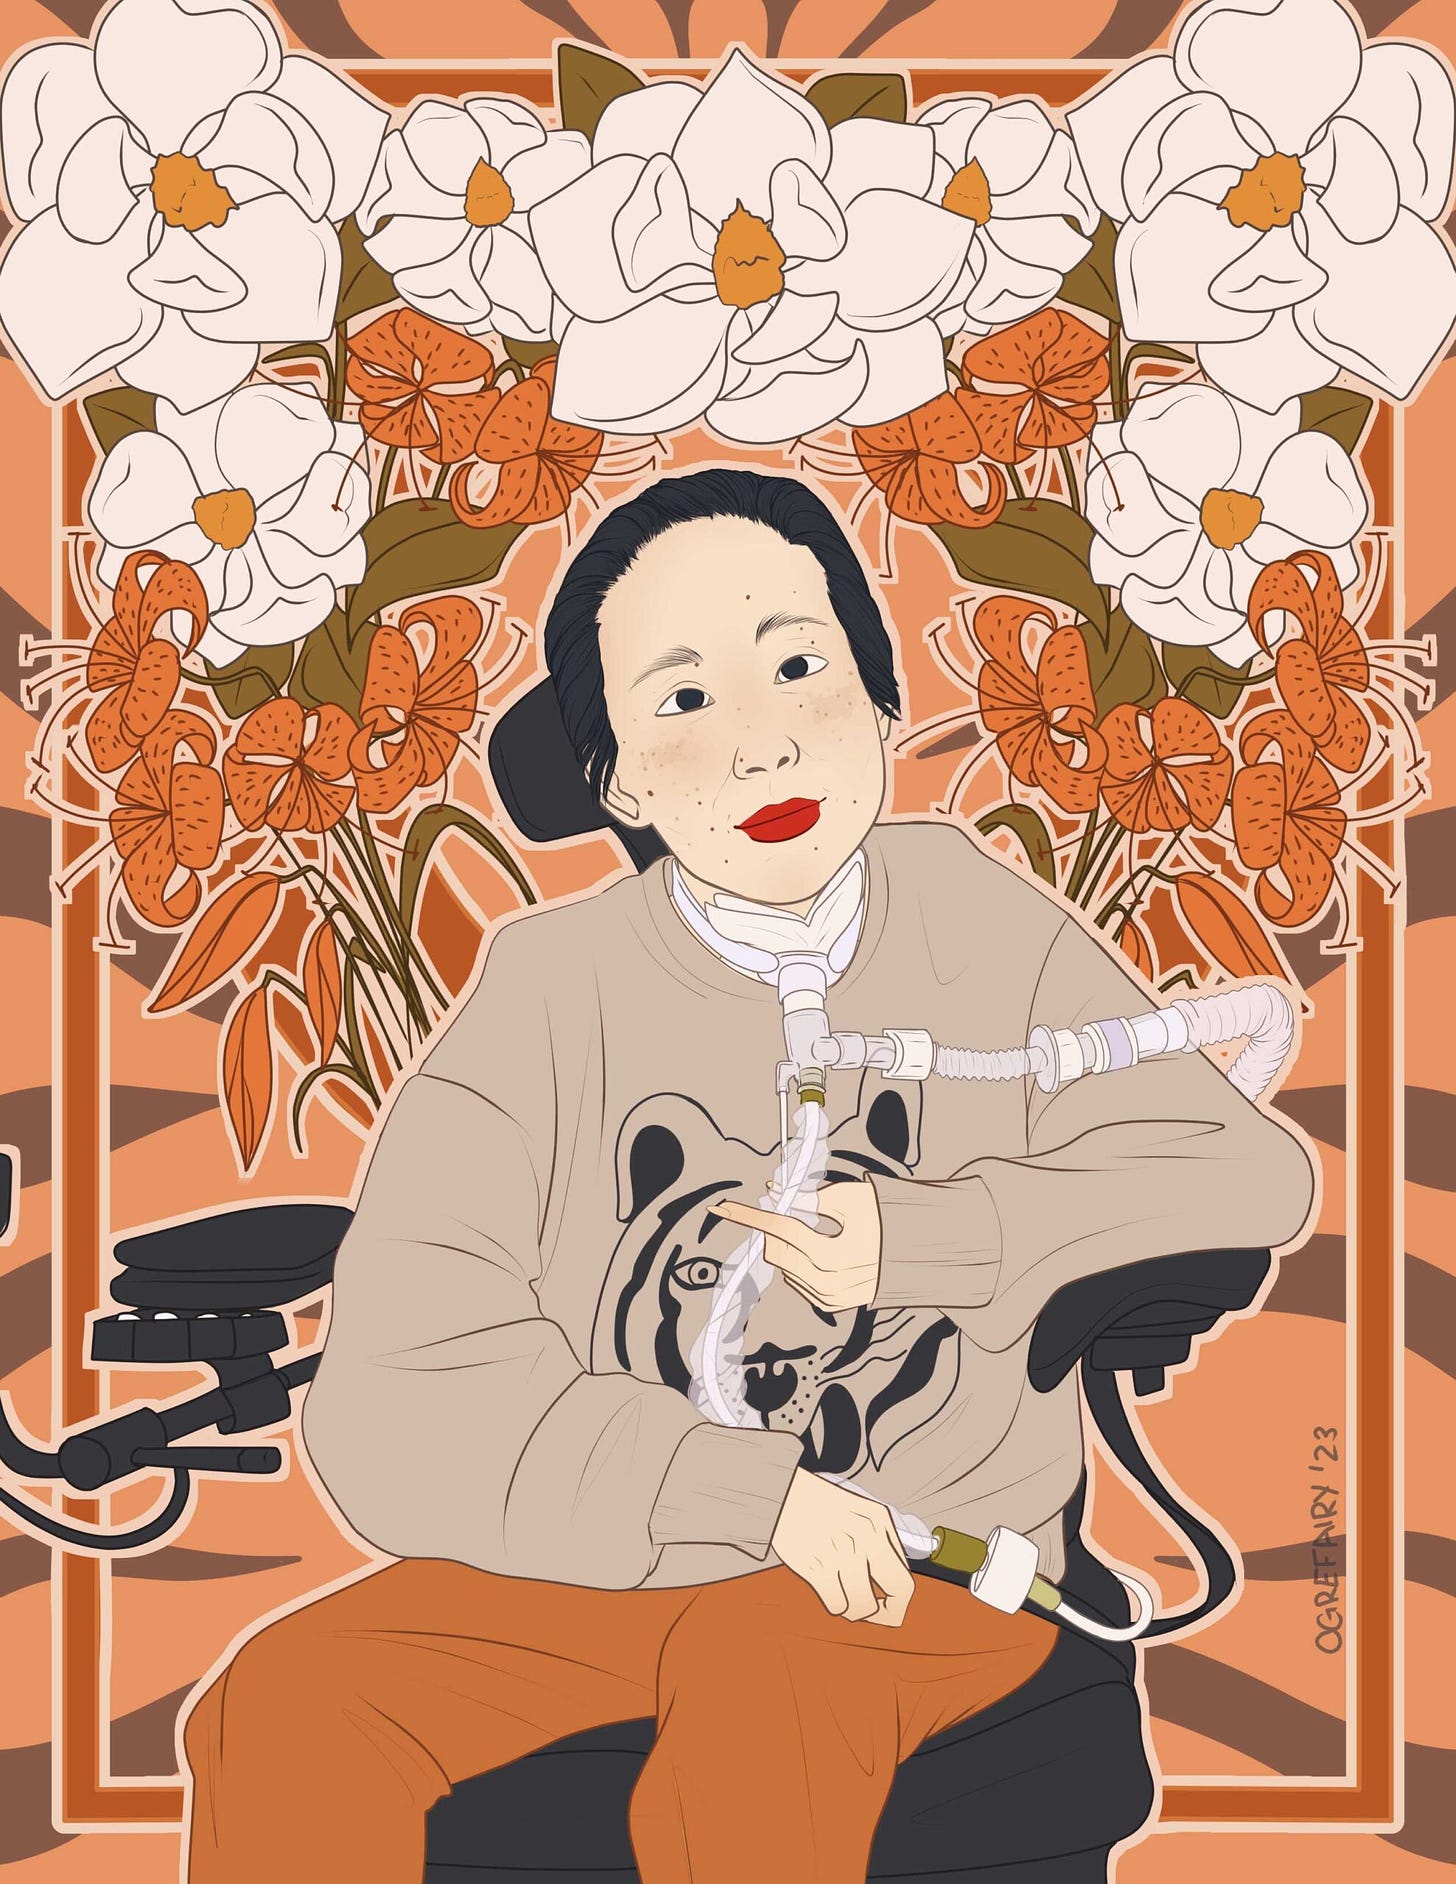 Digital portrait of an east asian woman who has black hair pulled back. She is wearing red lipstick, a tiger themed gray sweatshirt, and orange pants as she has a trach in her neck that is attached to a device that she is holding gently in her hands. She is sitting in her power wheelchair. The background is art nouveau inspired and tiger stripe themed with magnolias and tiger lilies and the color theme is mostly orange and black and white.